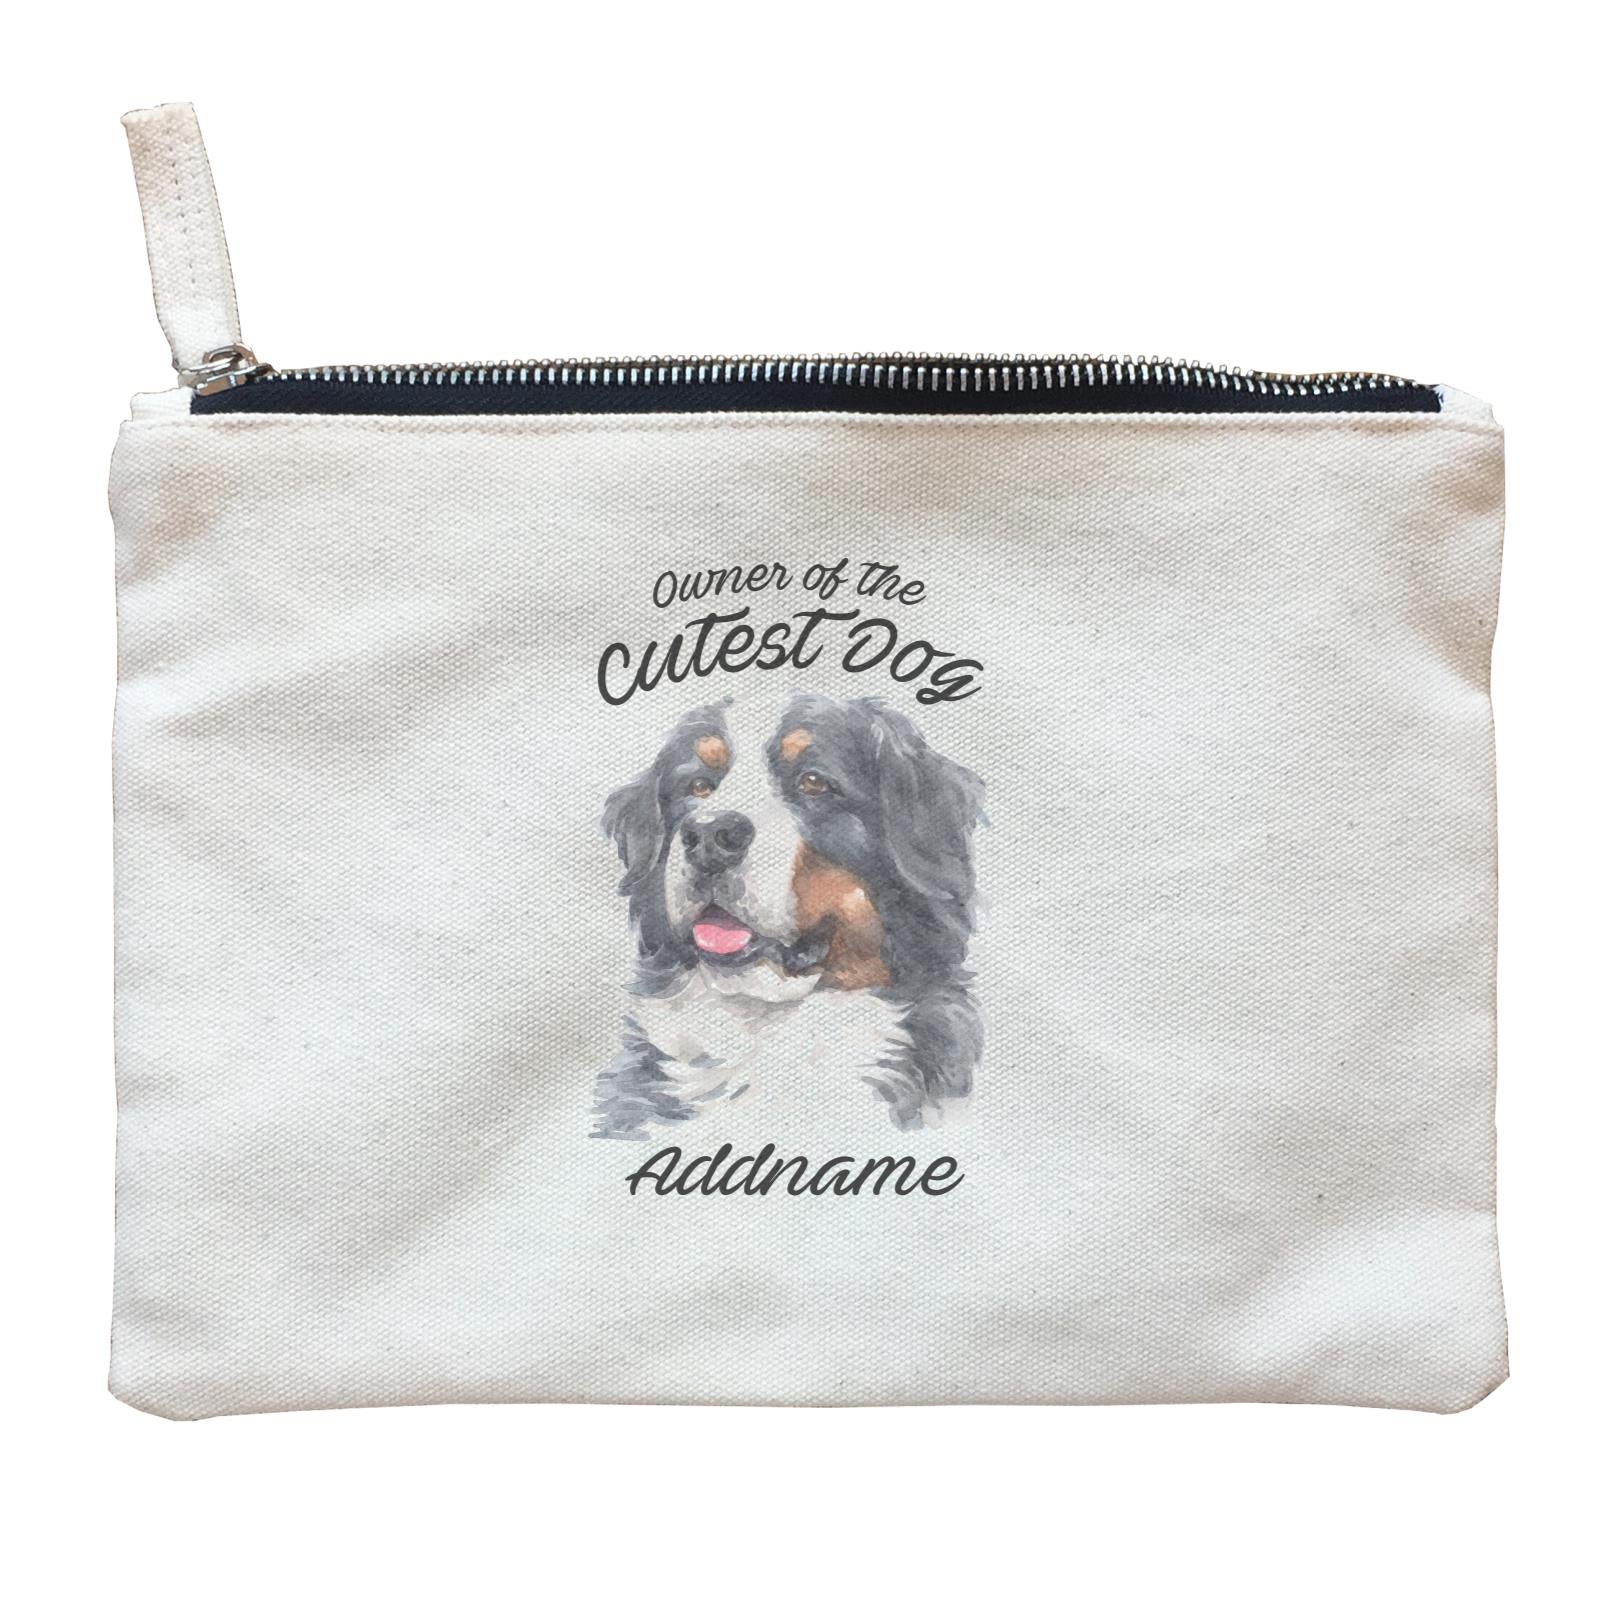 Watercolor Dog Owner Of The Cutest Dog Bernese Mountain Dog Addname Zipper Pouch